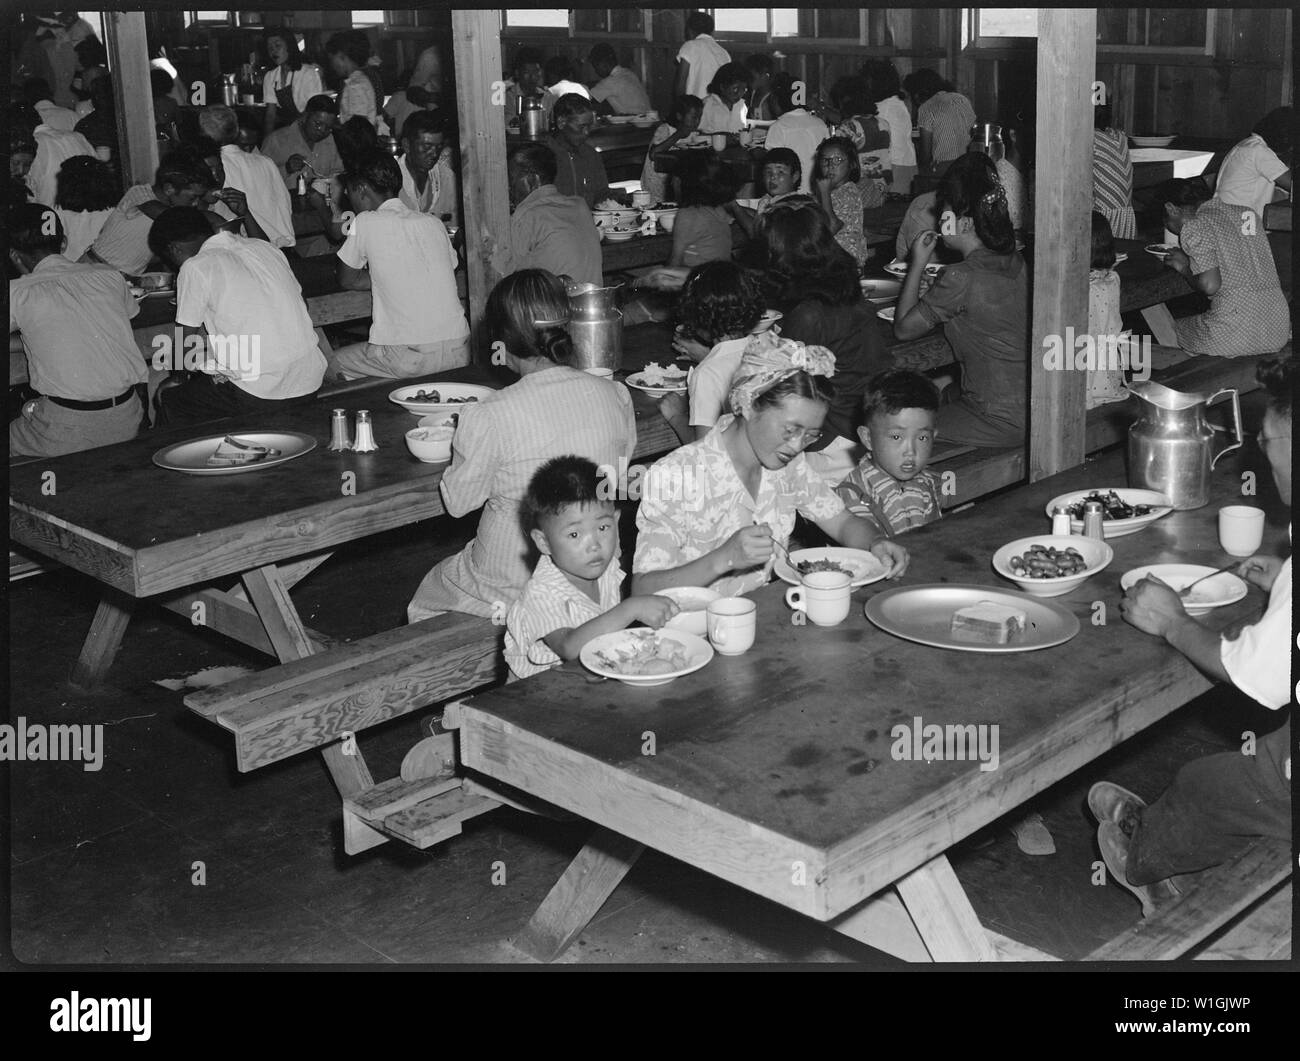 Manzanar Relocation Center, Manzanar, California. Mealtime in one of the messhalls at this War Relo . . .; Scope and content:  The full caption for this photograph reads: Manzanar Relocation Center, Manzanar, California. Mealtime in one of the messhalls at this War Relocation Authority center for evacuees of Japanese ancestry. Stock Photo